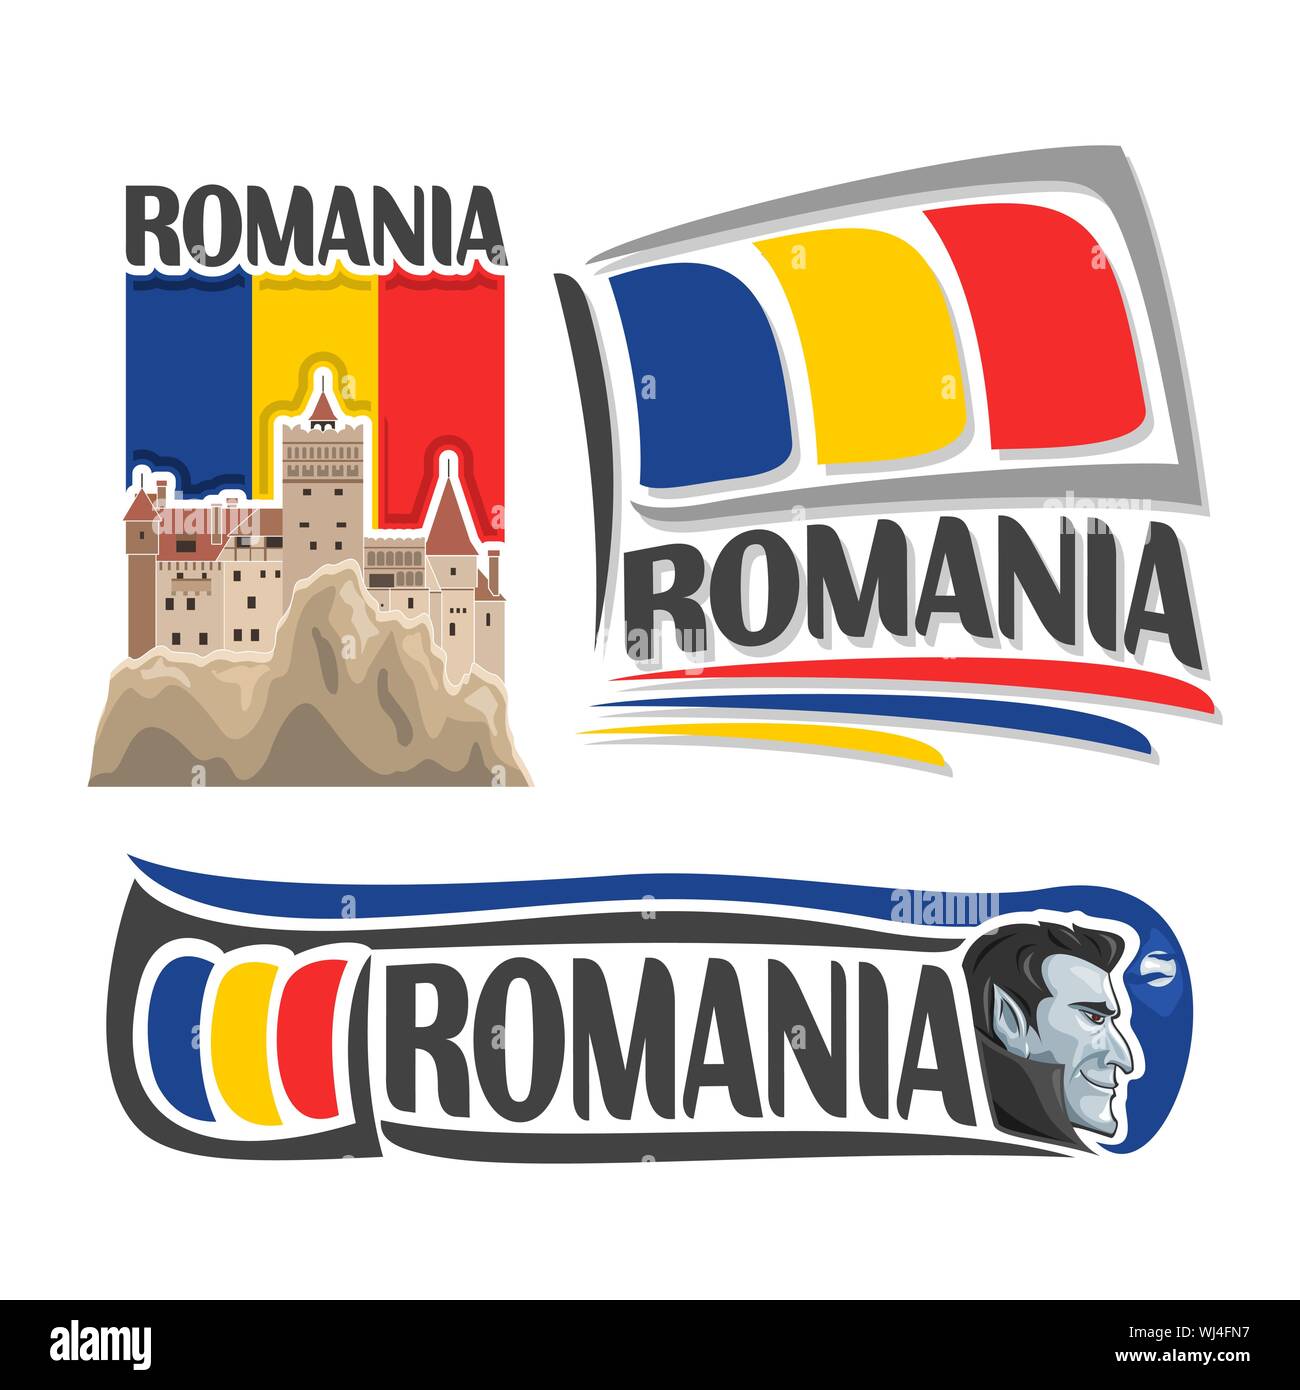 Vector logo for Romania, 3 isolated illustrations: Bran castle in Transylvania on background of national state flag, symbol of Romania architecture an Stock Vector